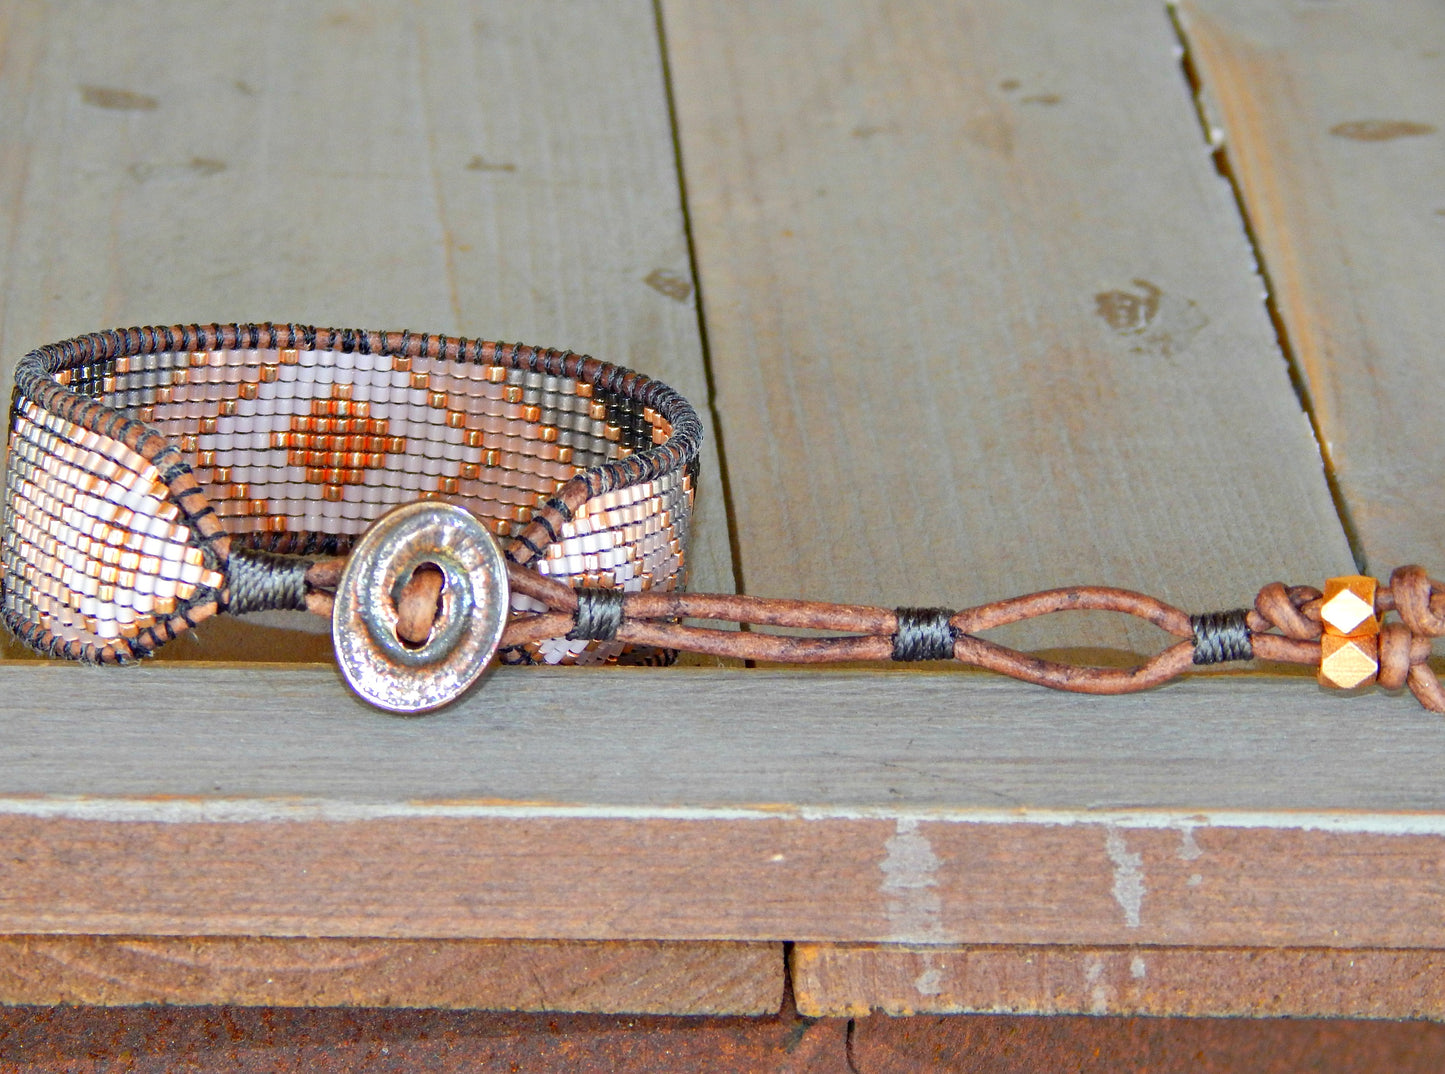 Rose Gold and Gray Bead Loom Woven Leather Cuff Bracelet